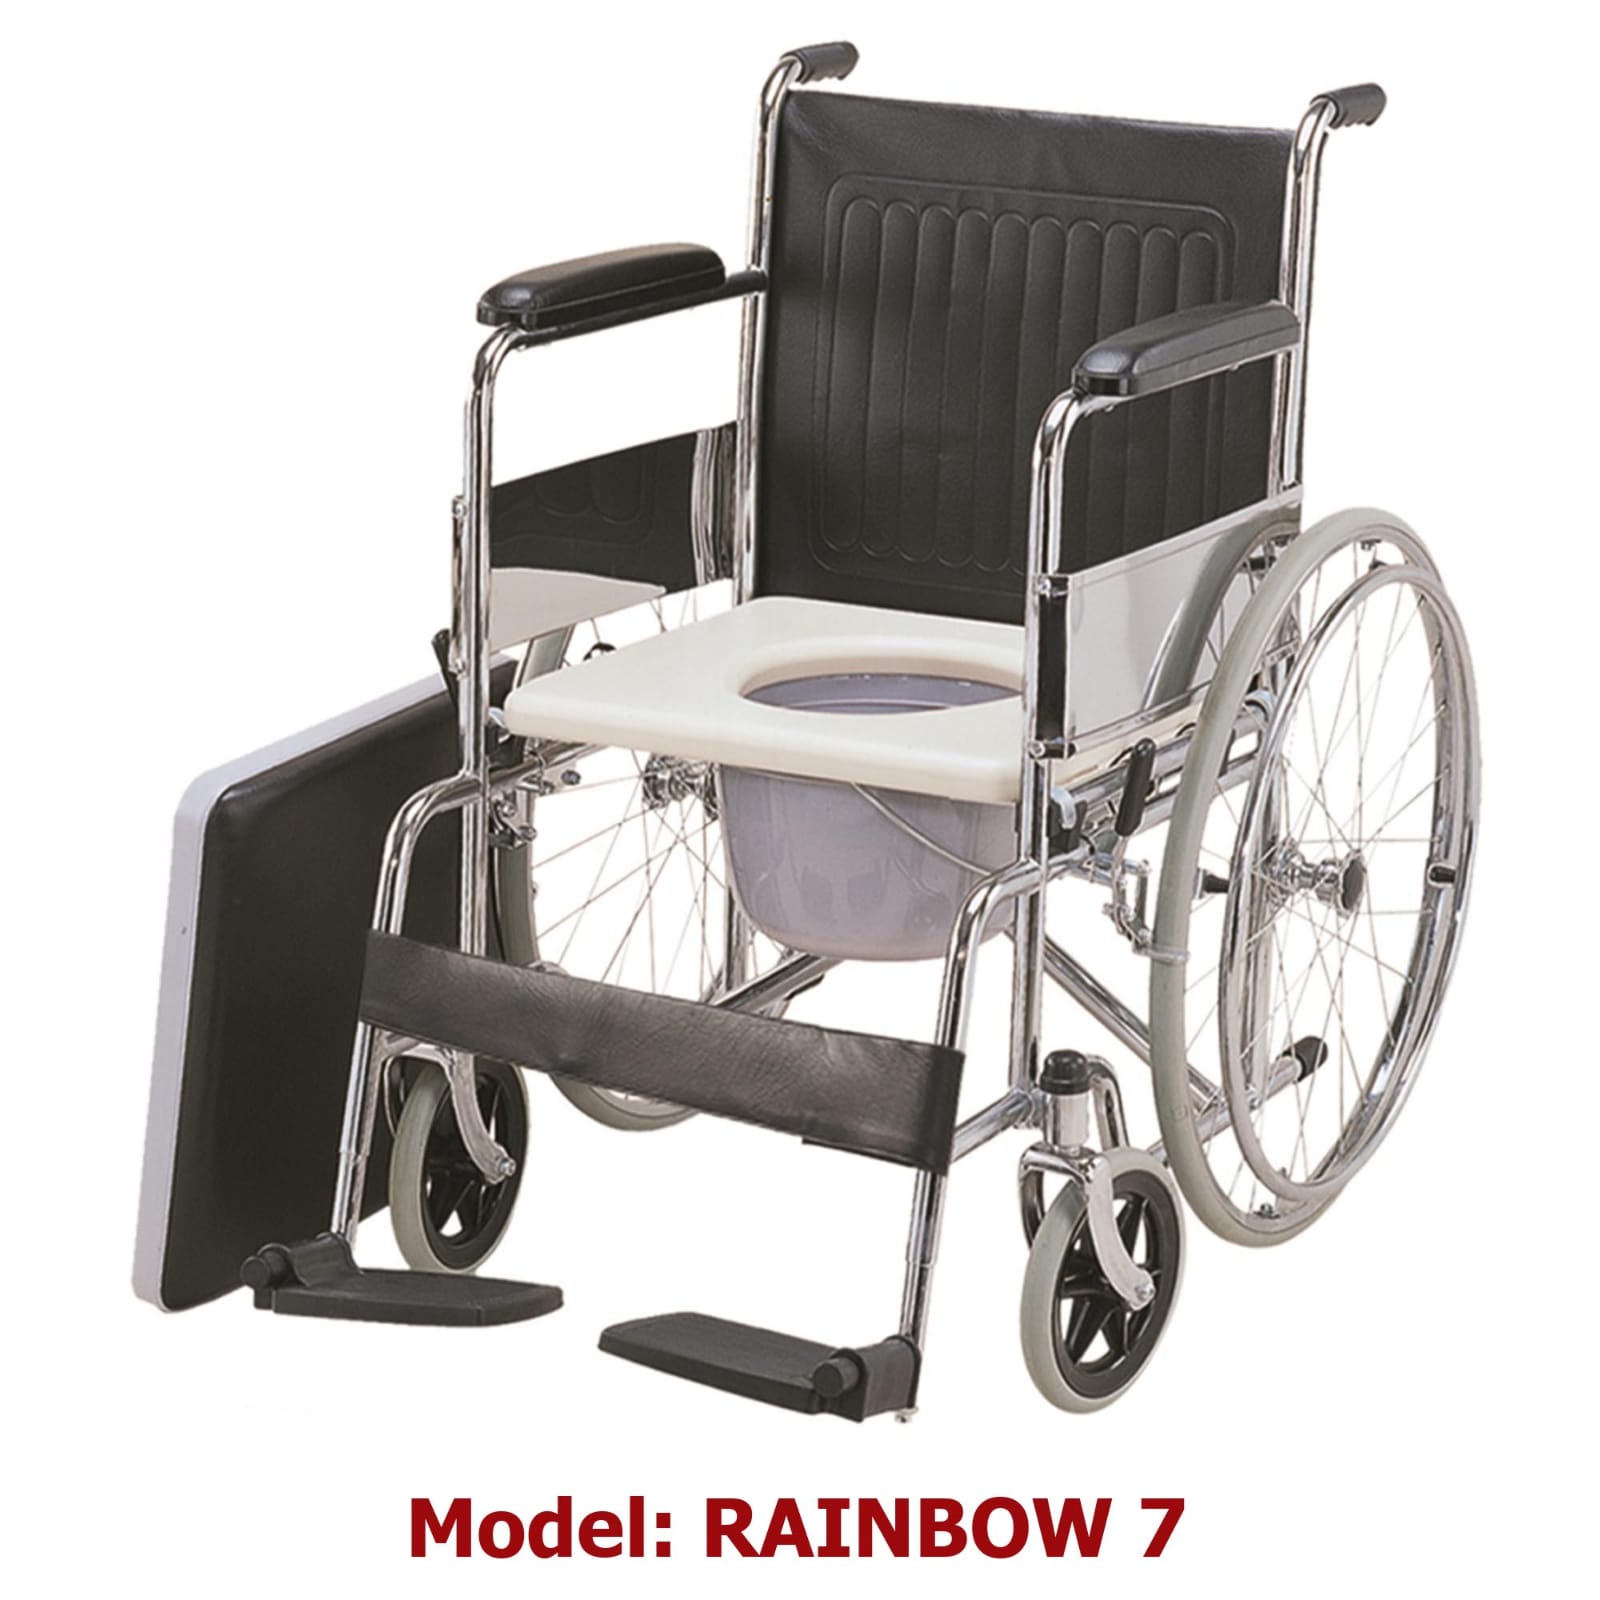 Karma Commode Wheelchair Rainbow 7 On Sale Suppliers, Service Provider in Ashok park